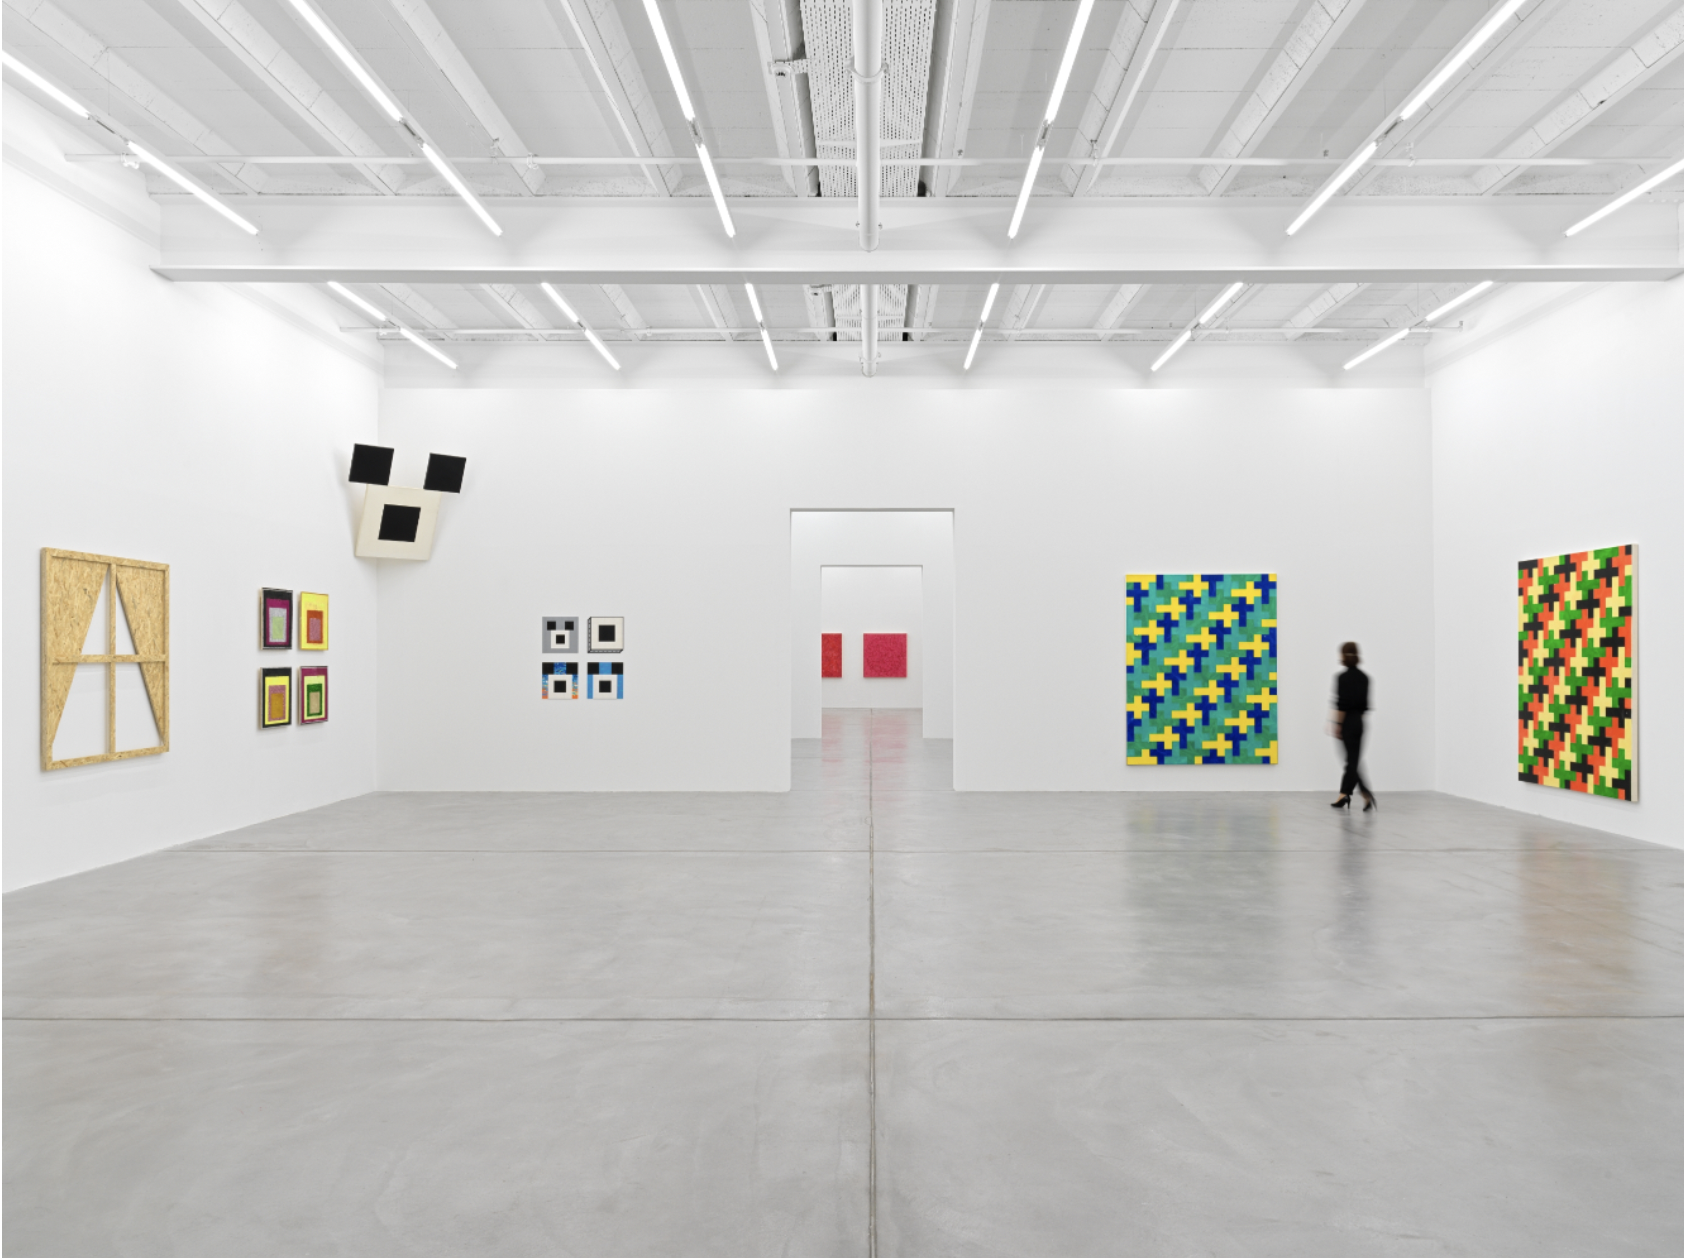 Installation view with works by Gina Fischli, Anton Bruhin, and Jan Kiefer